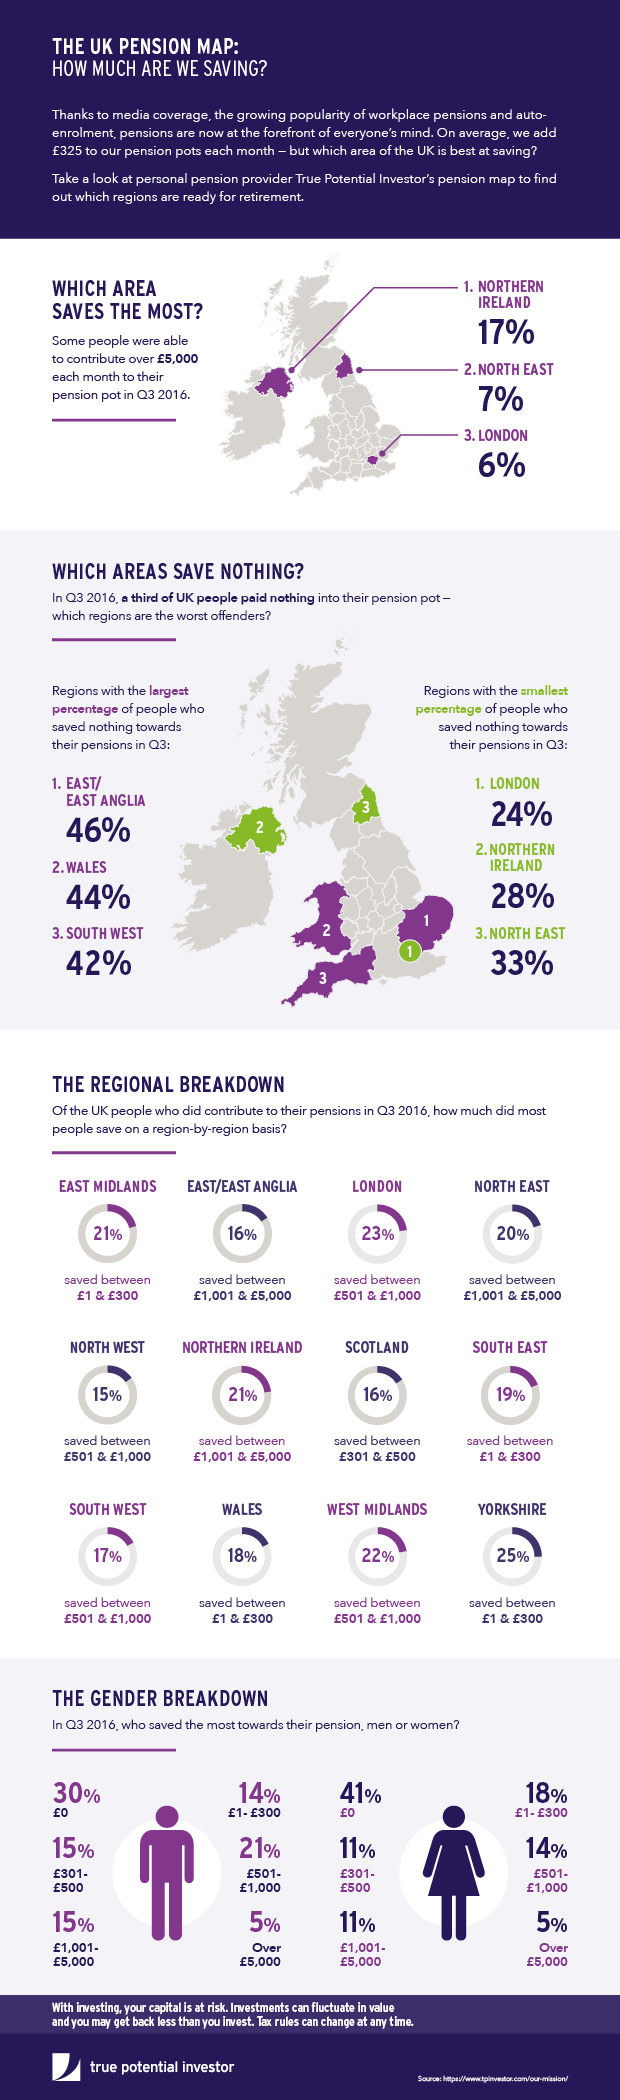 Retirement: How Well Is The UK Population Preparing?